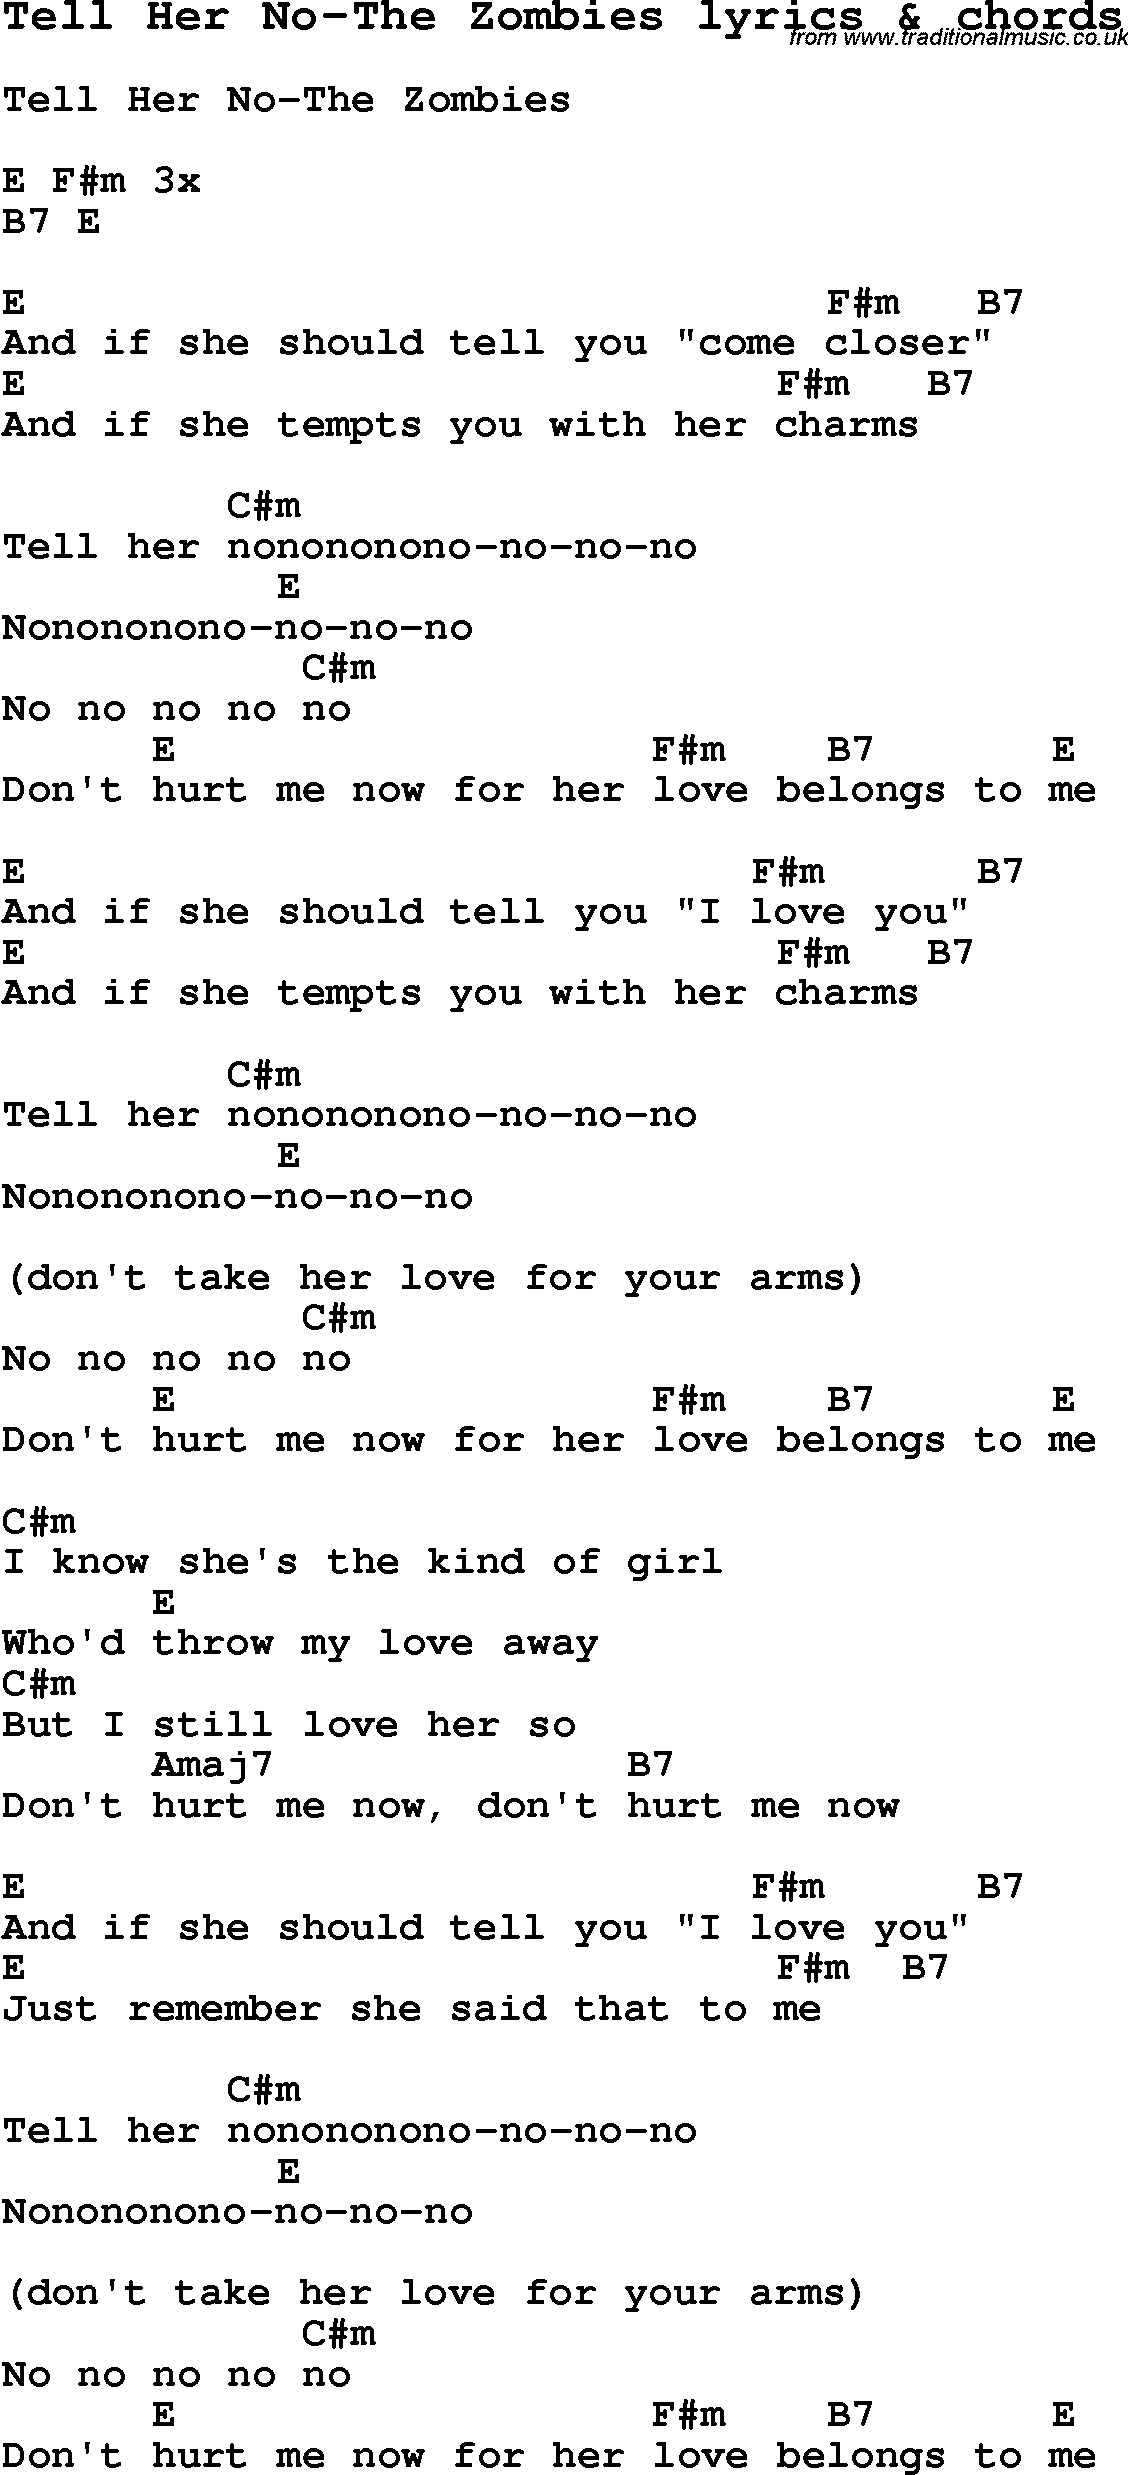 Love Song Lyrics for: Tell Her No-The Zombies with chords for Ukulele, Guitar Banjo etc.